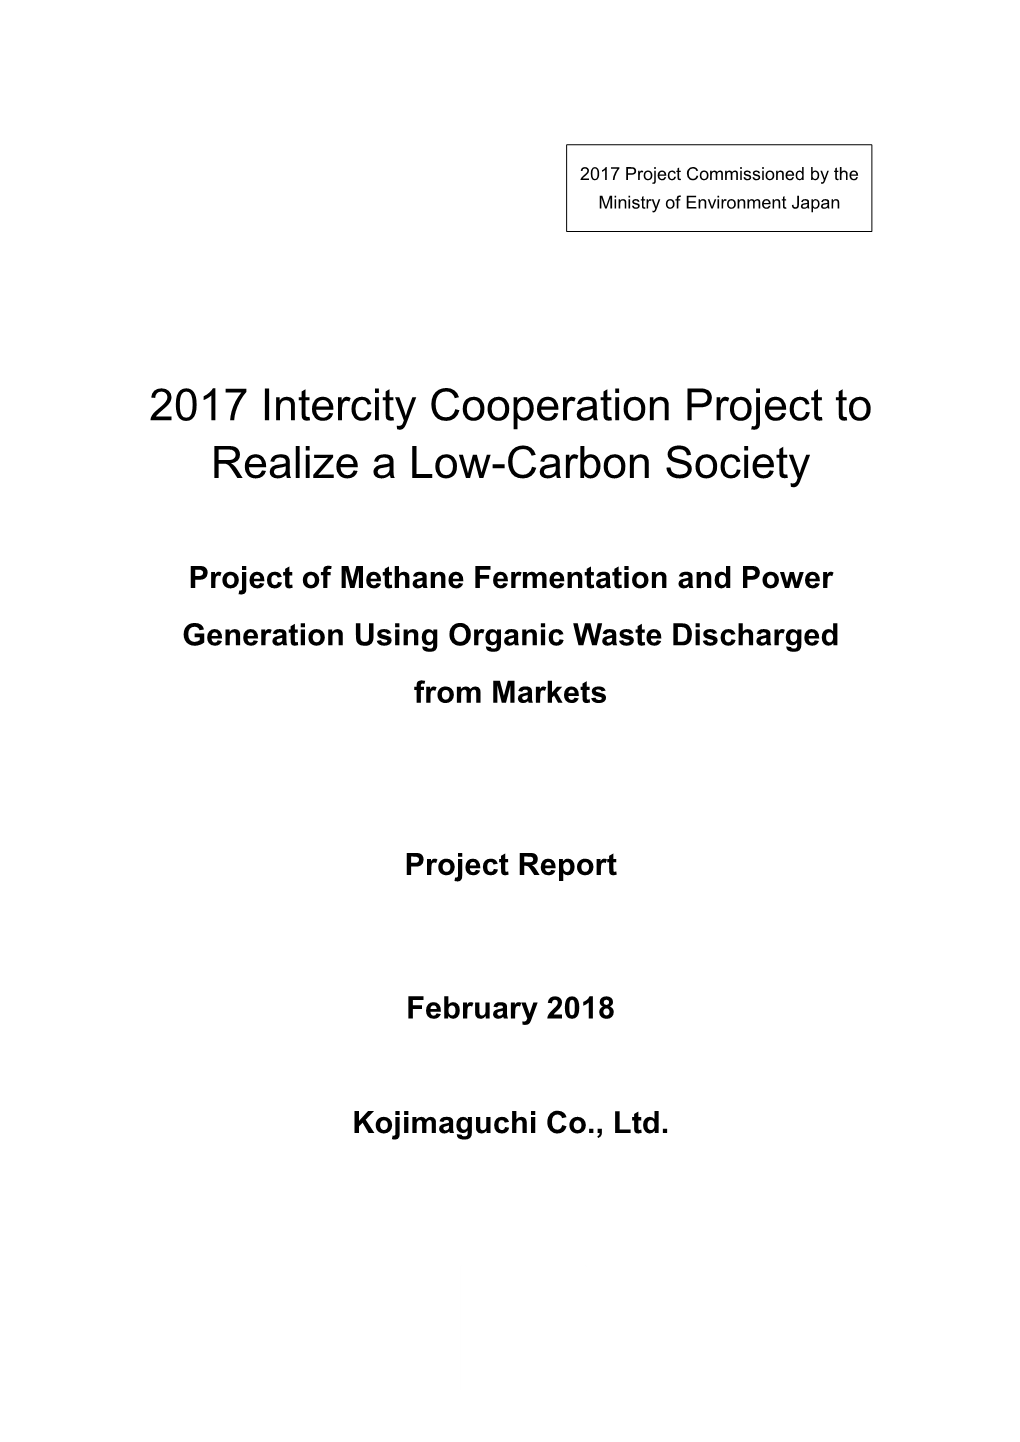 2017 Intercity Cooperation Project to Realize a Low-Carbon Society